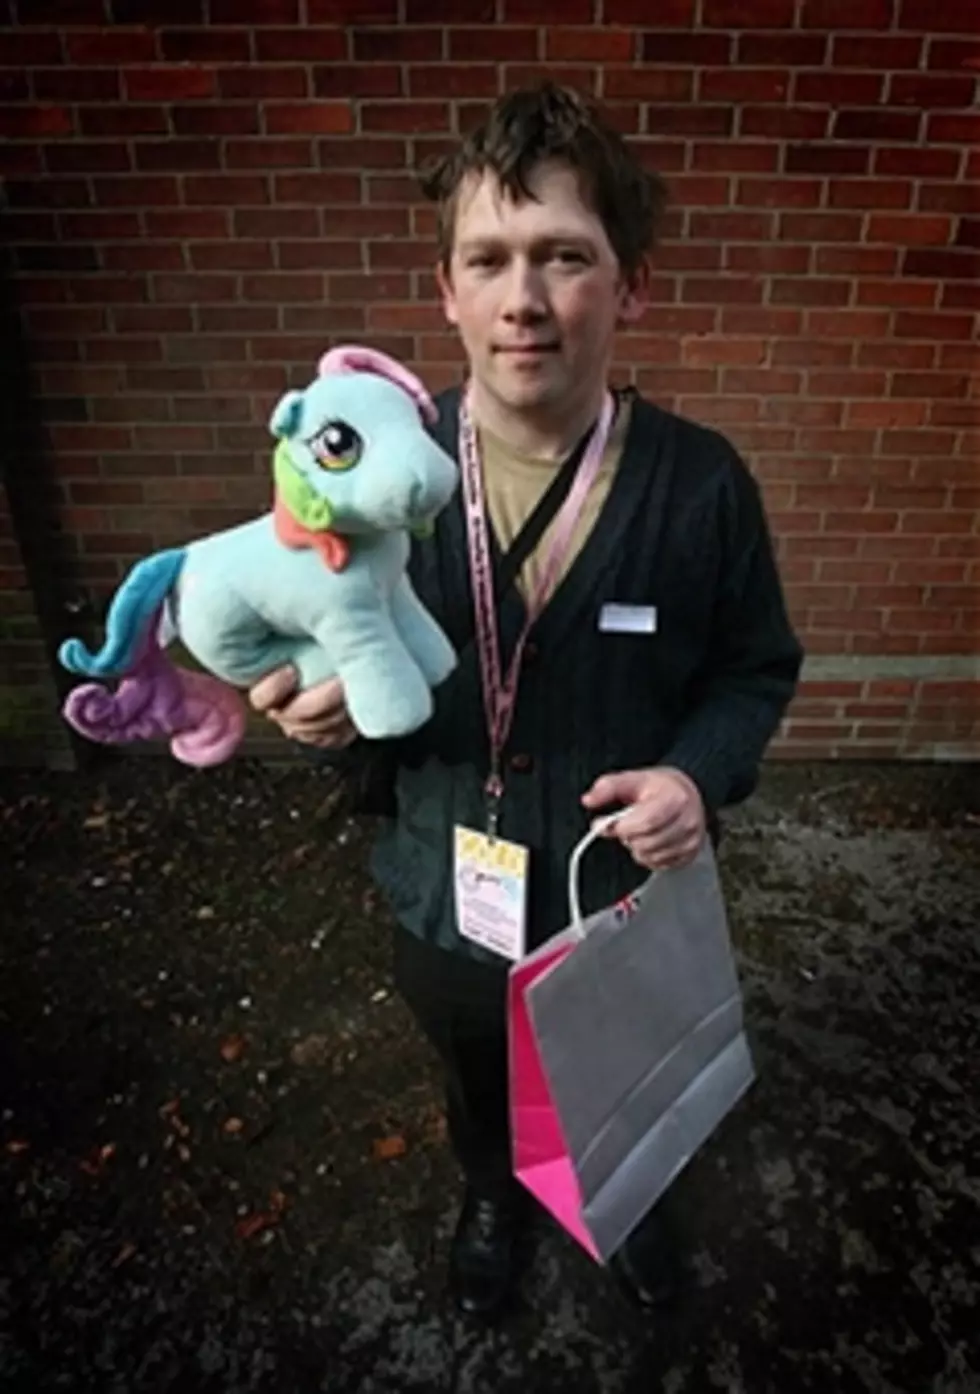 No &#8220;My Little Pony&#8221; Backpack!